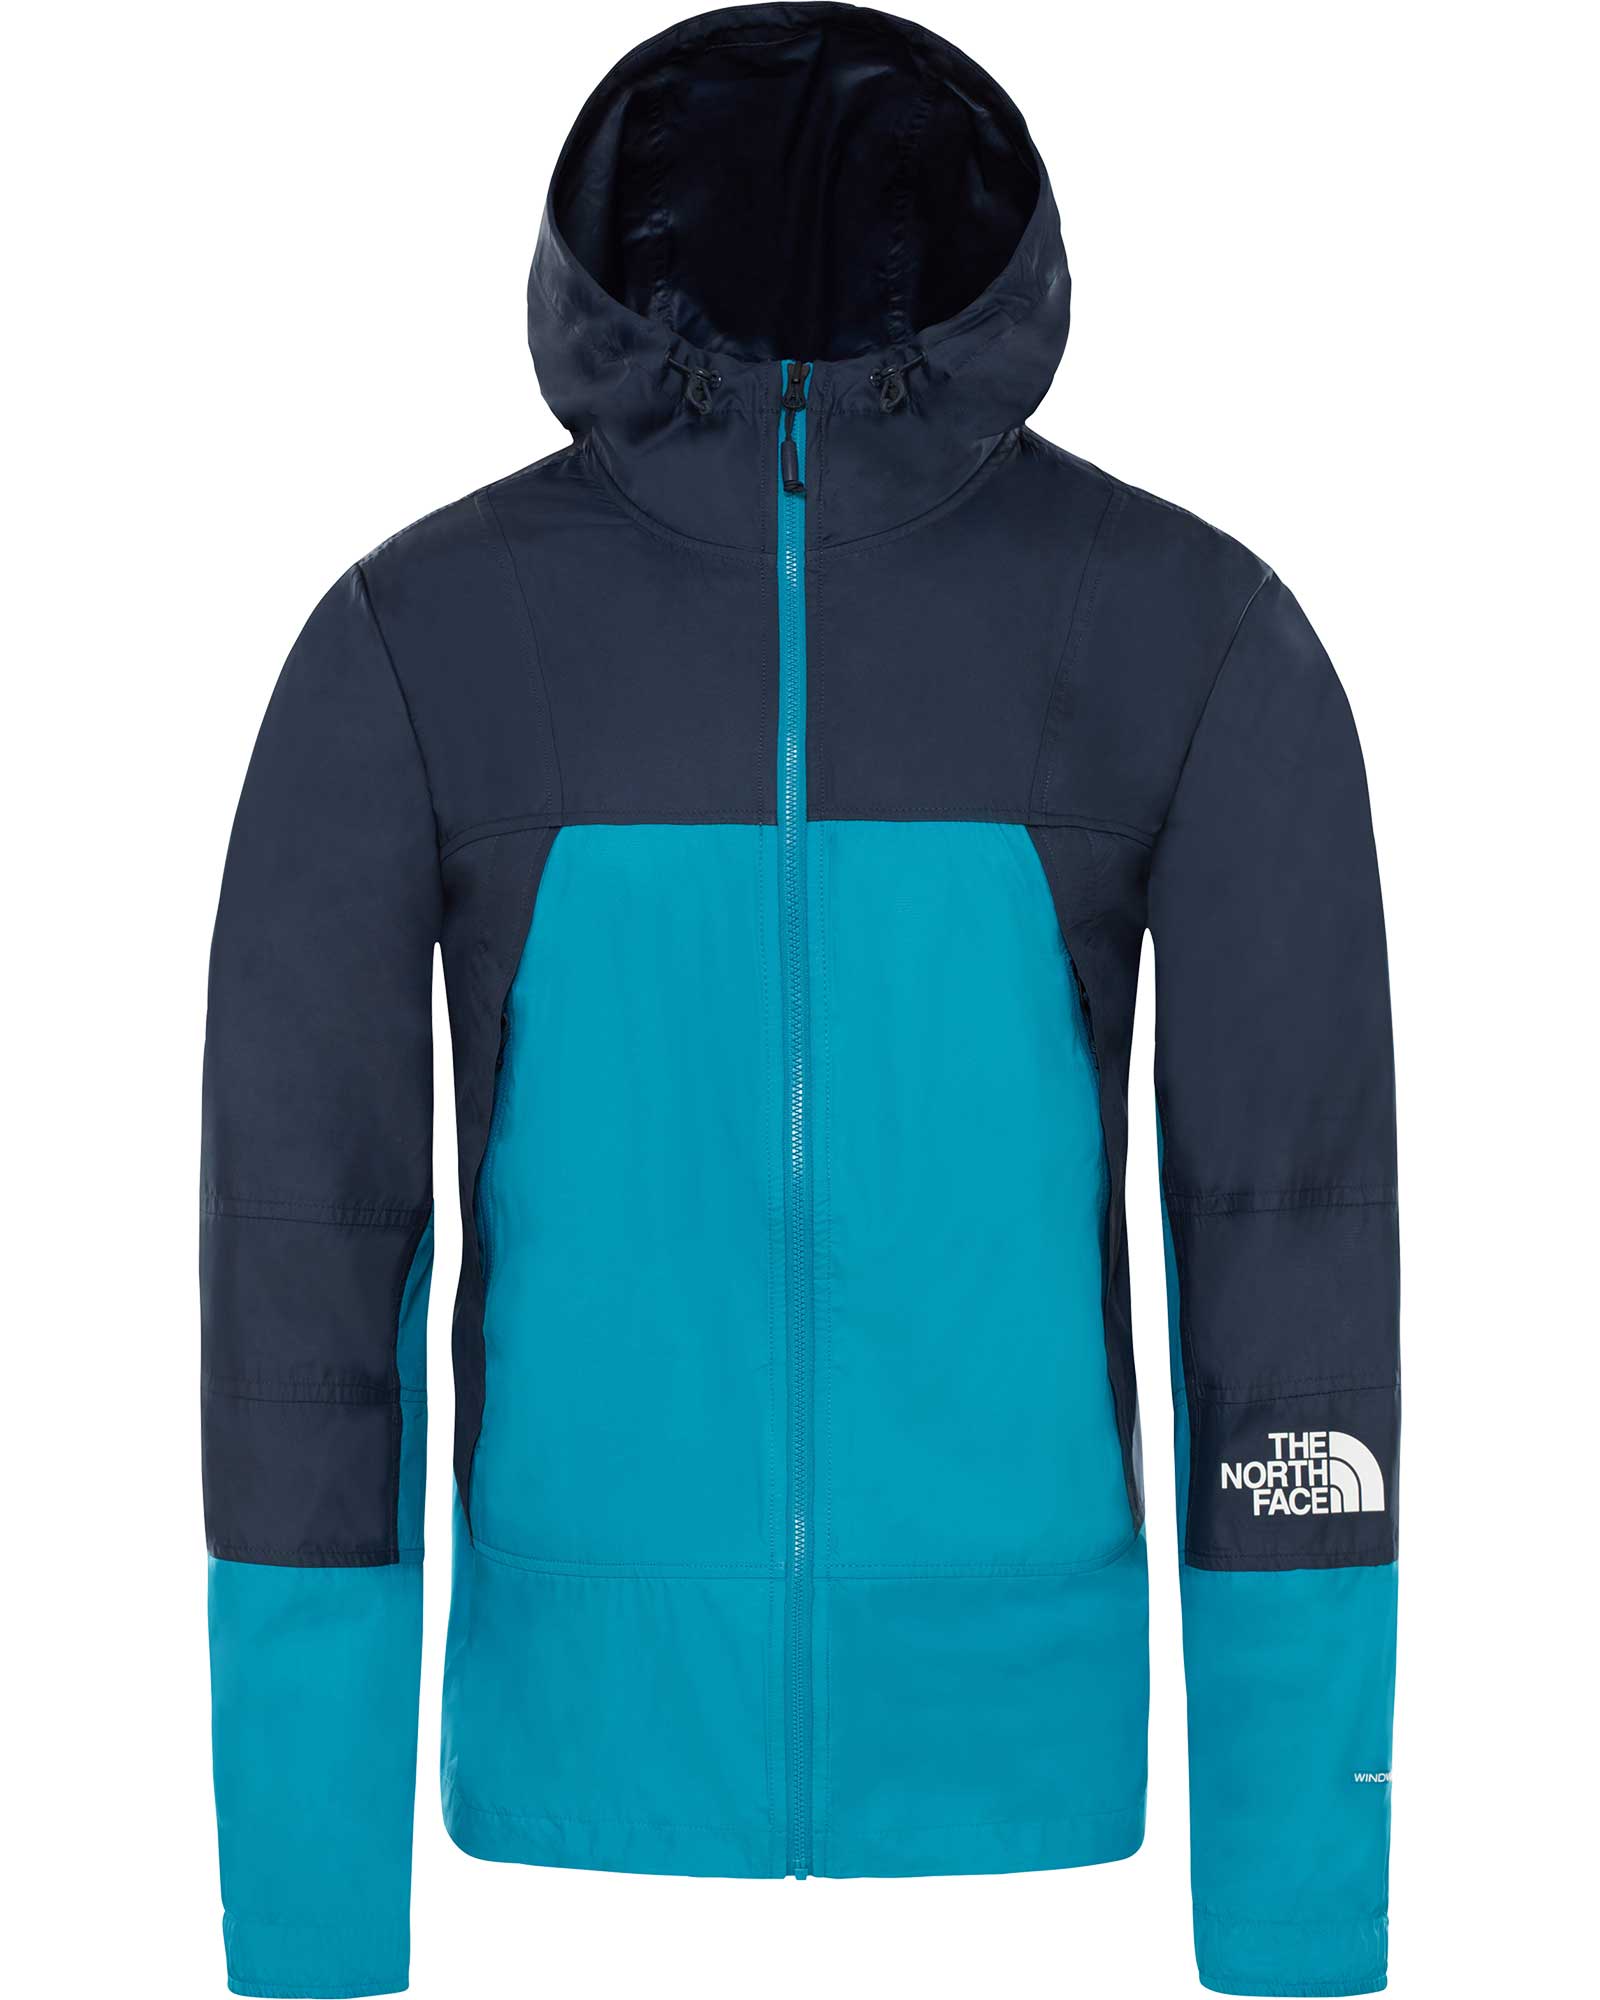 The North Face Men’s Mountain Light Windshell Jacket - Crystal Teal S